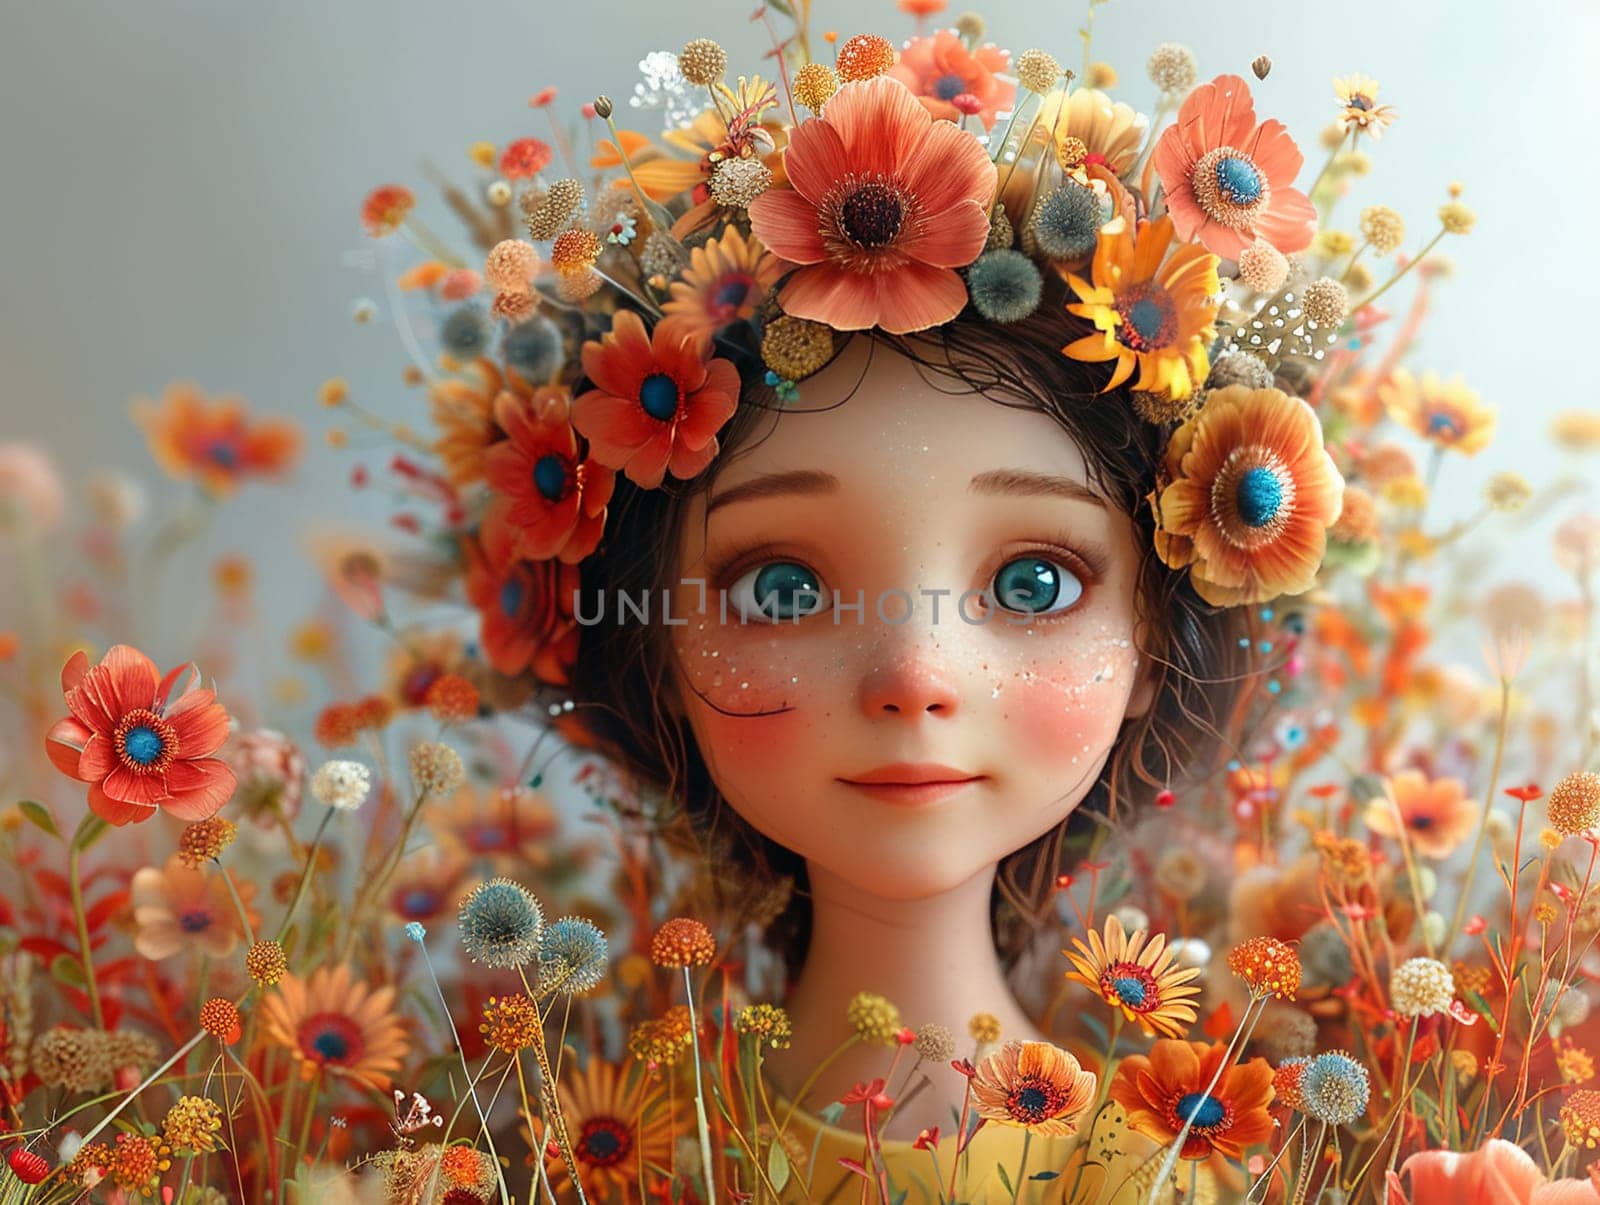 Flower-themed whimsical character designs by Benzoix